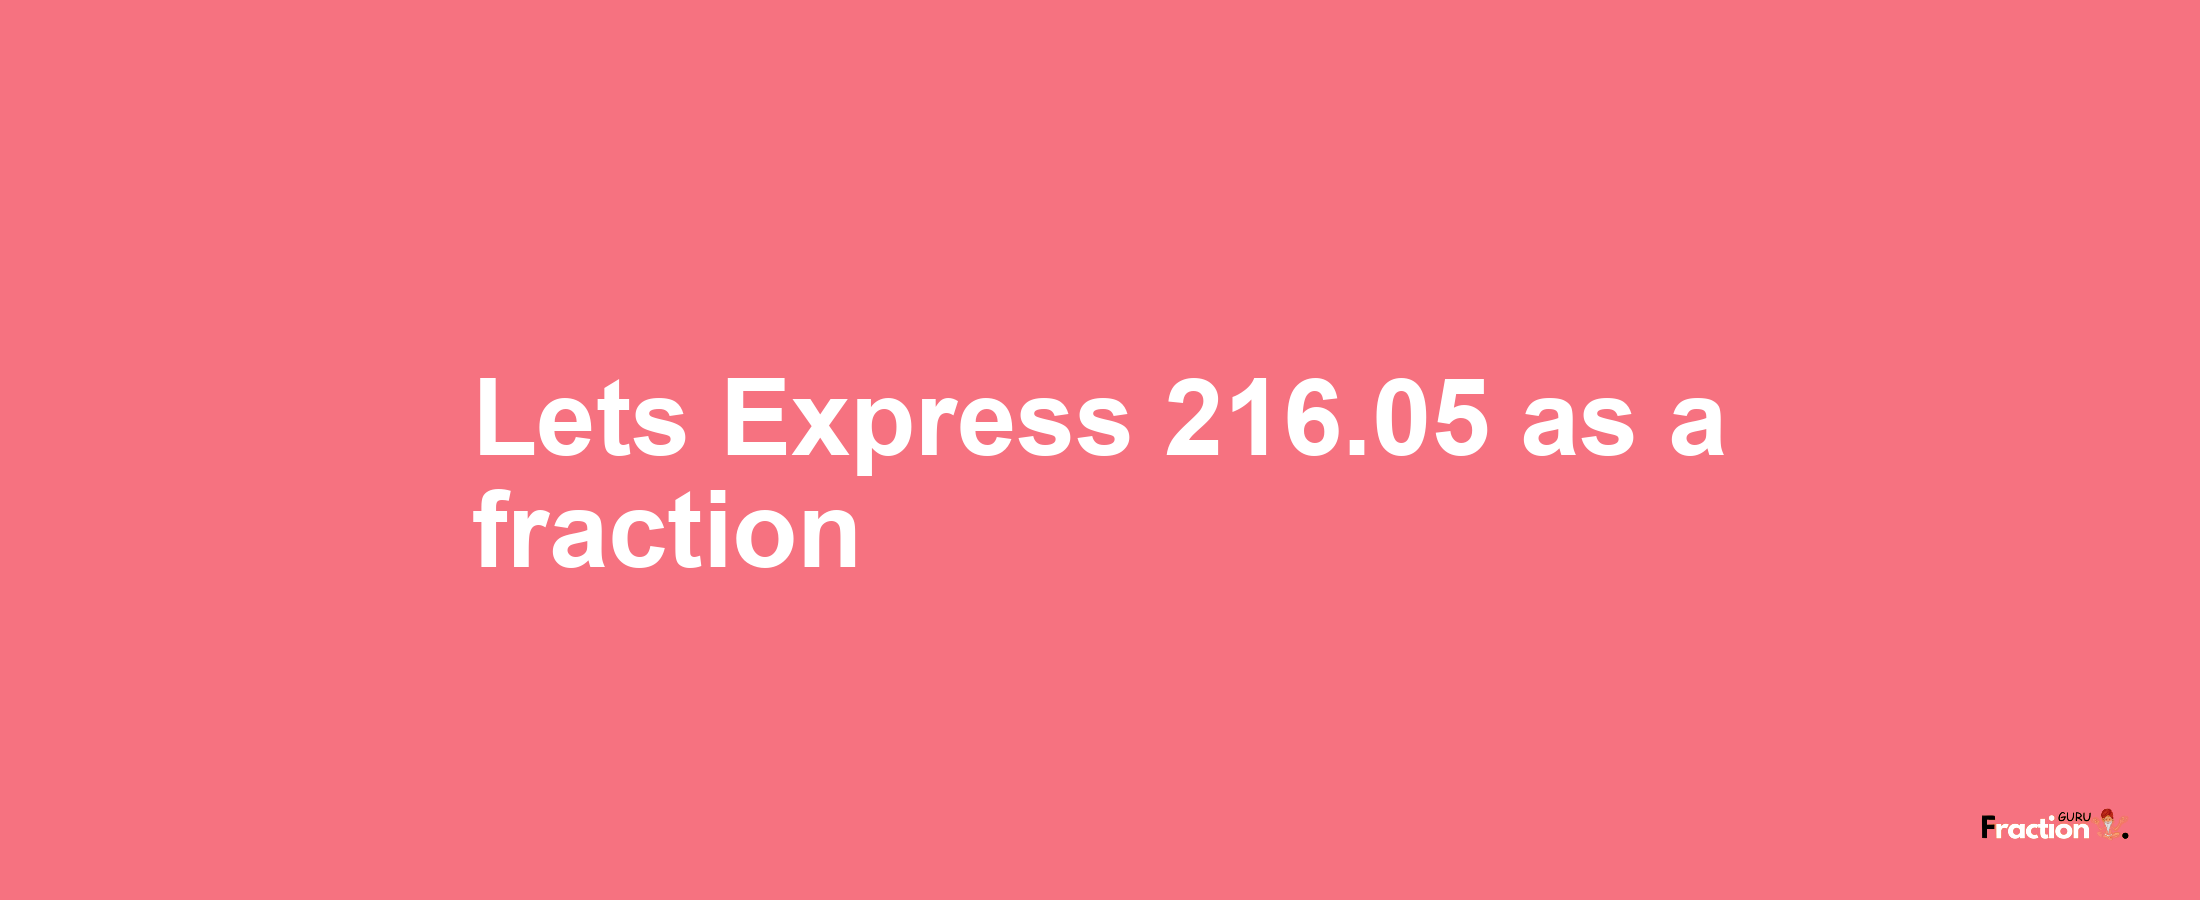 Lets Express 216.05 as afraction